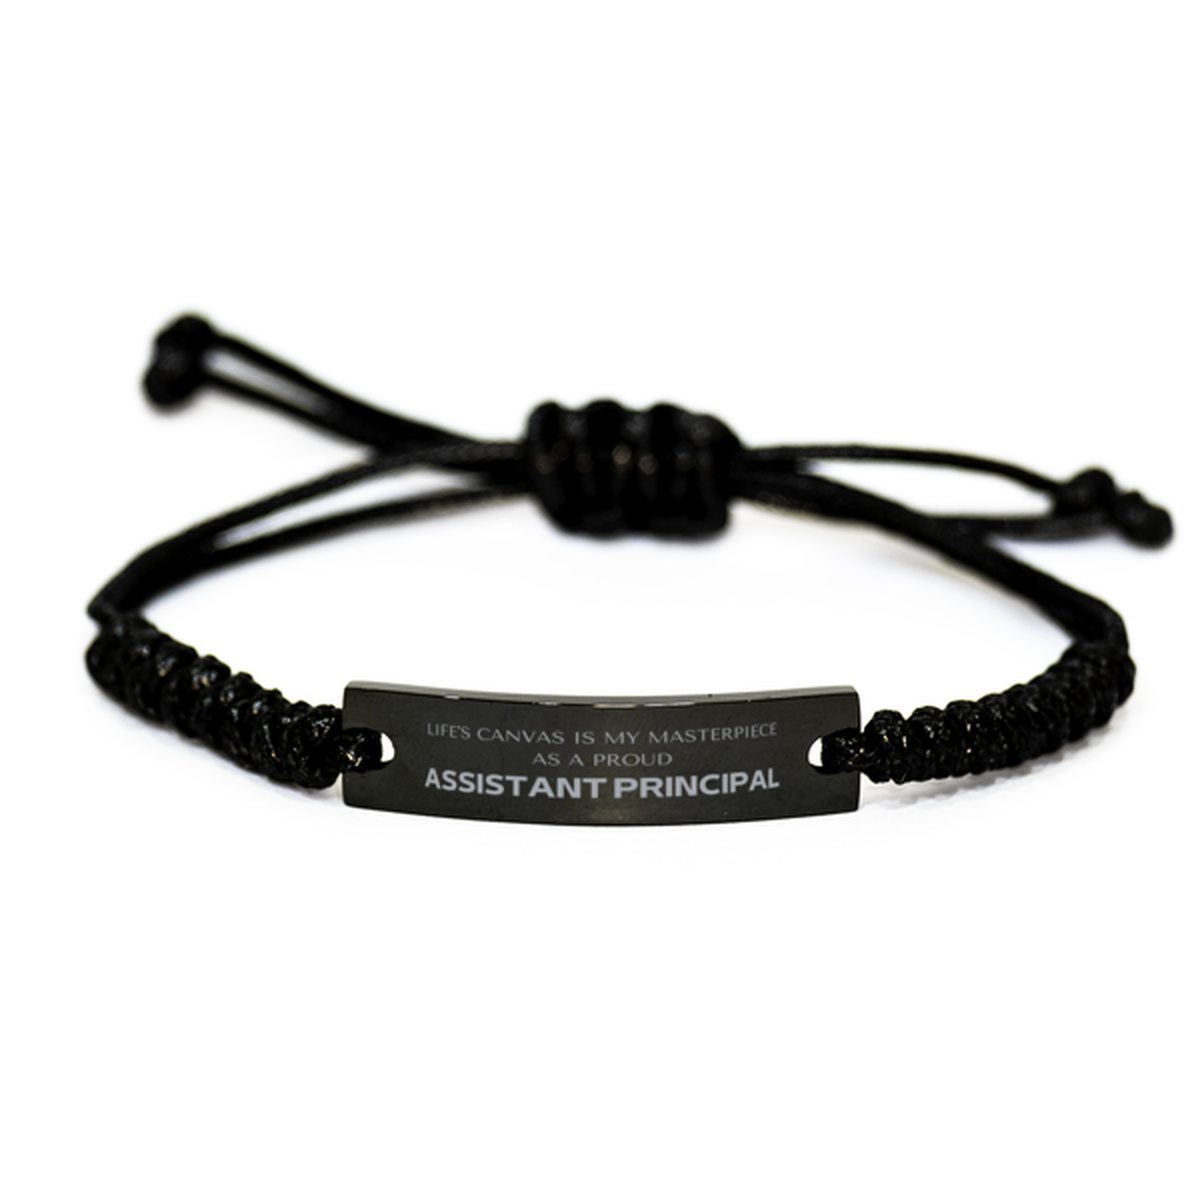 Proud Assistant Principal Gifts, Life's canvas is my masterpiece, Epic Birthday Christmas Unique Black Rope Bracelet For Assistant Principal, Coworkers, Men, Women, Friends